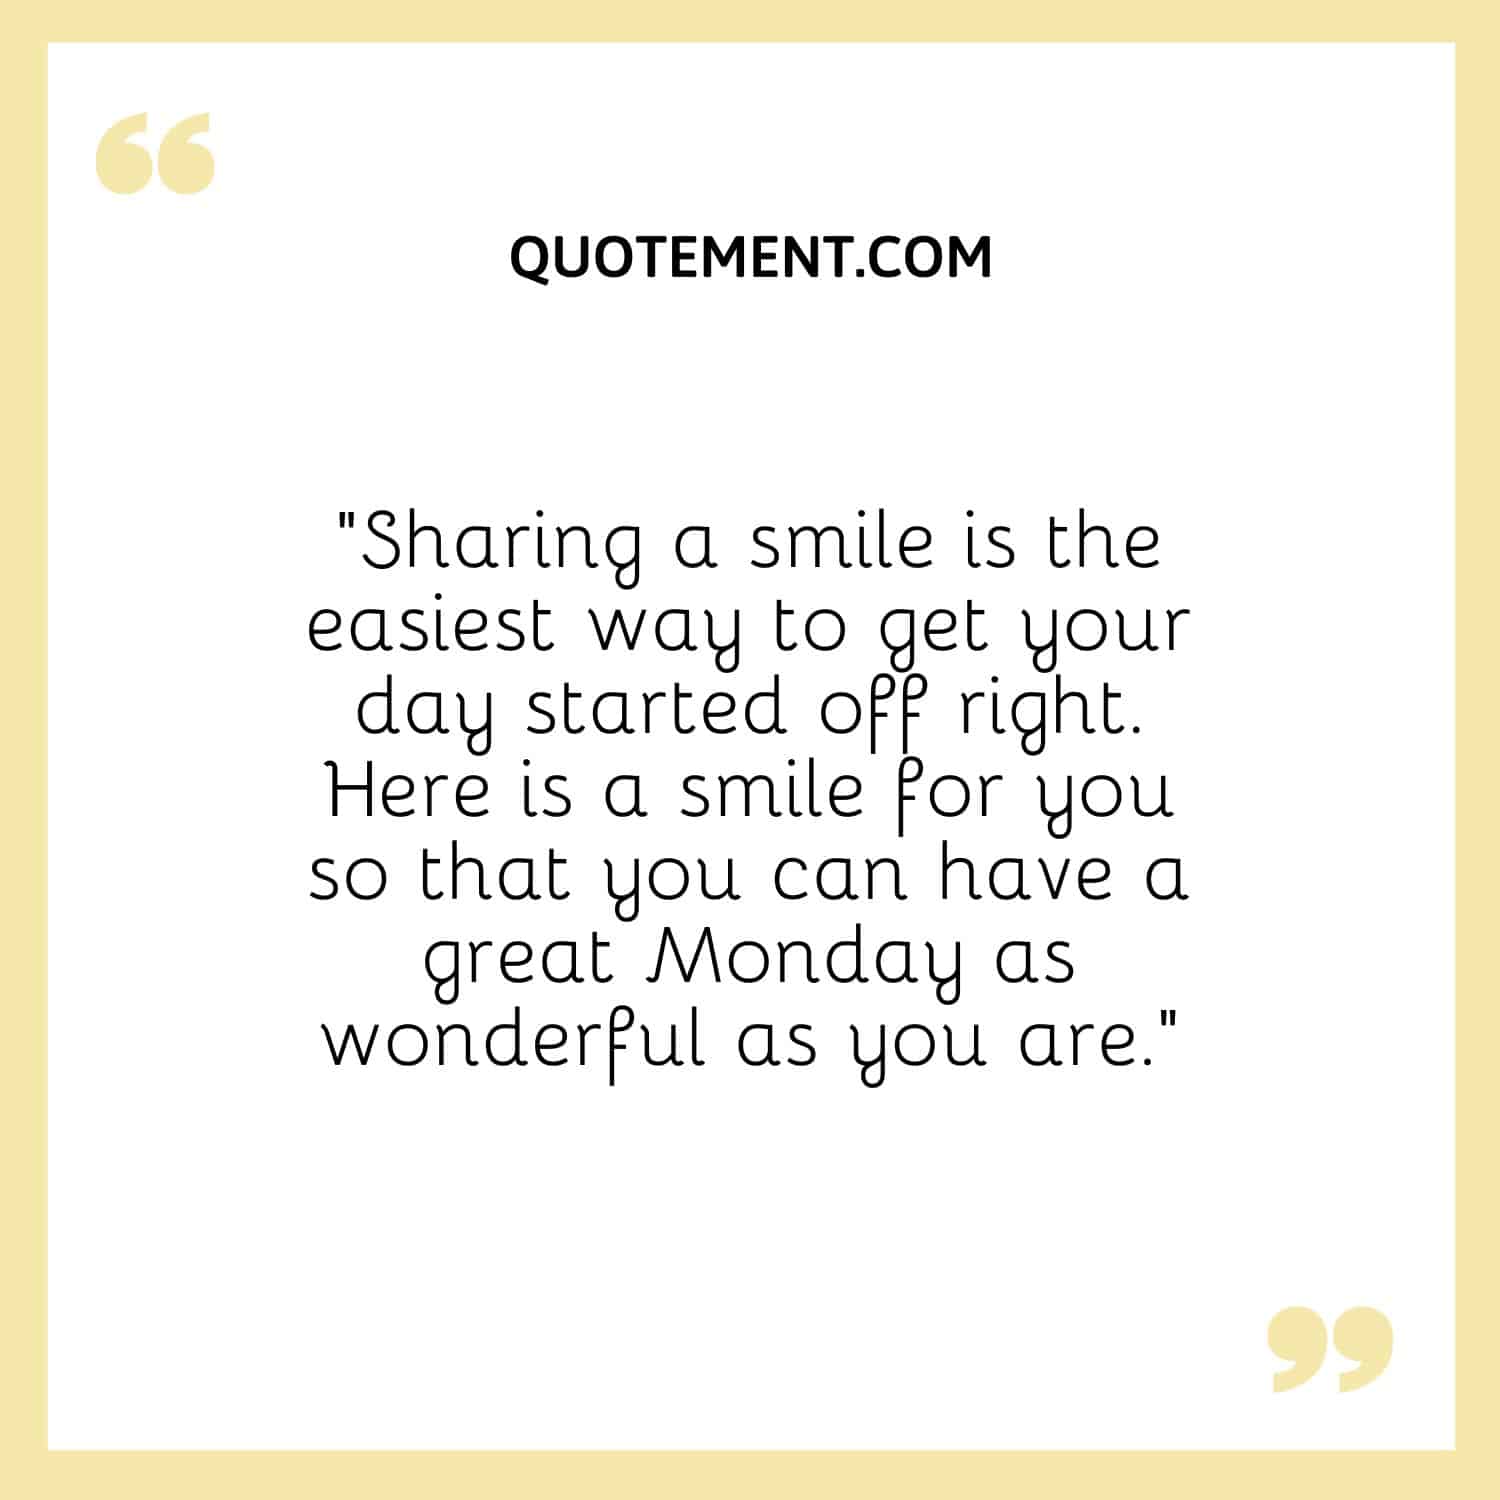 Sharing a smile is the easiest way to get your day started off right